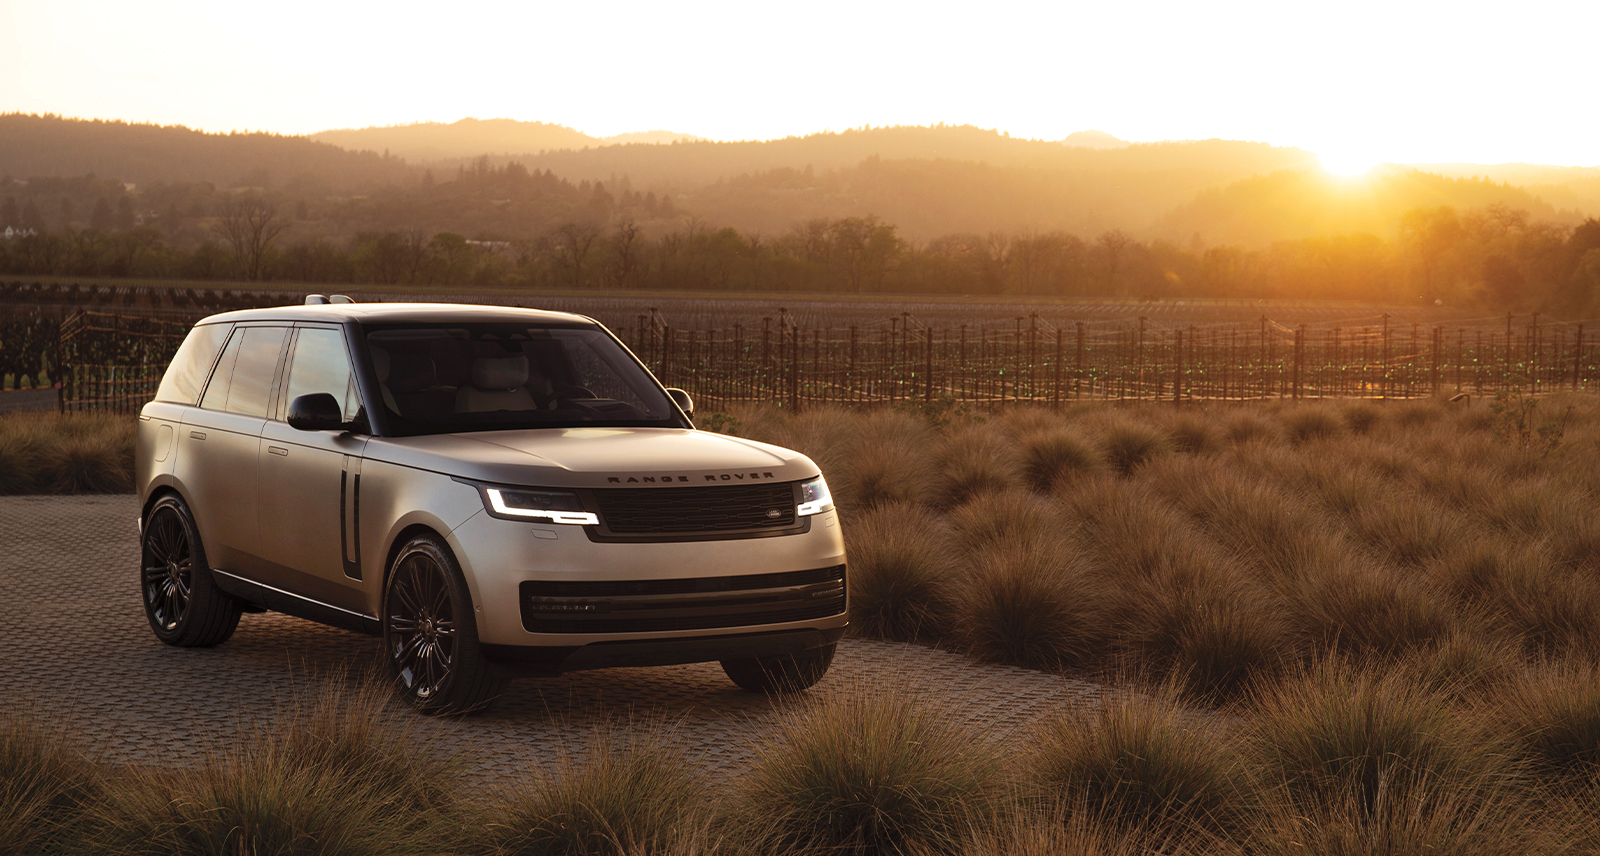 Range Rover on a field in California, with mountain sunset in back